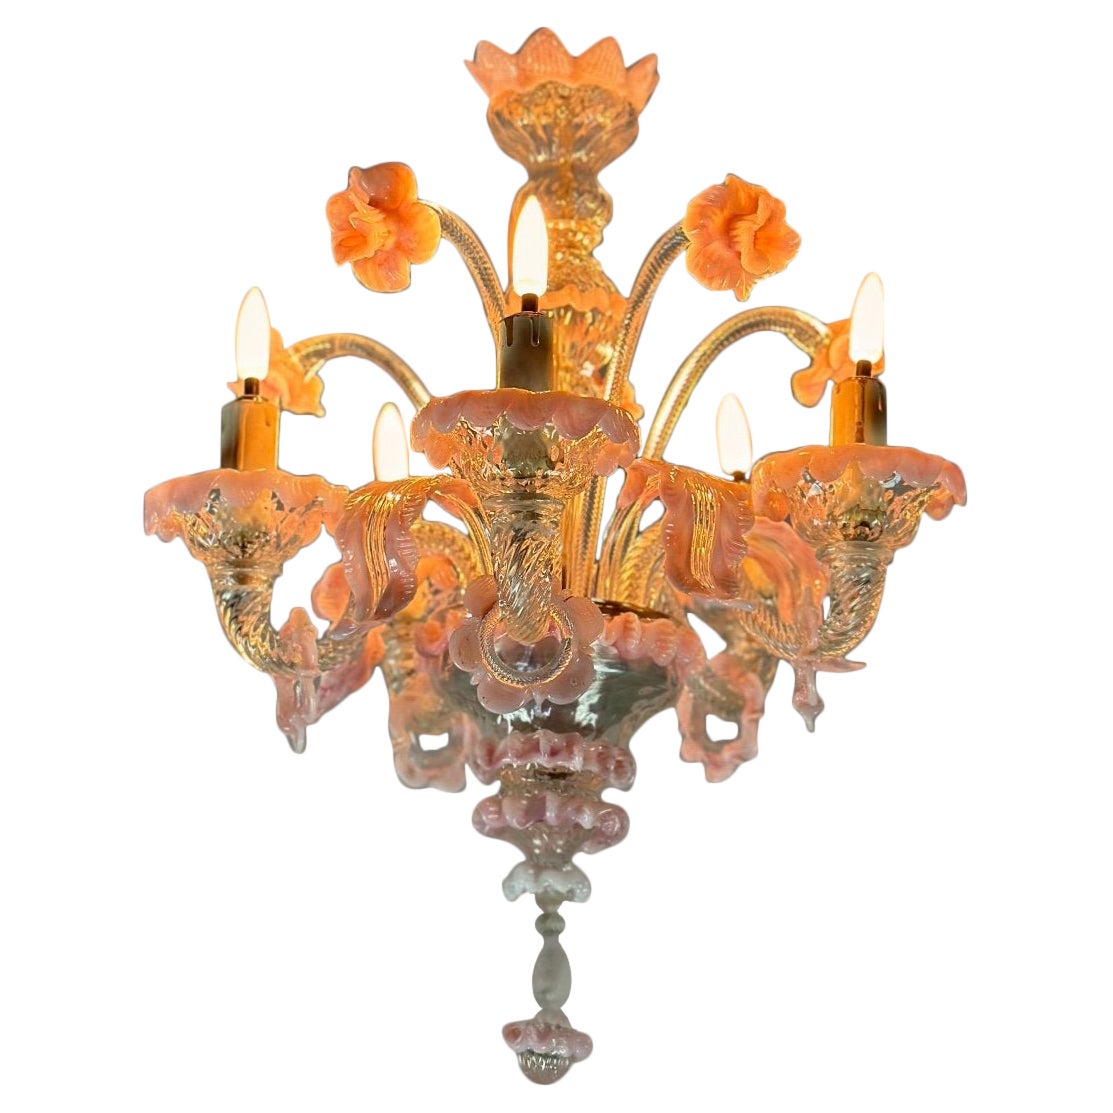 Small Venetian Chandelier In Colorless And Pink Murano Glass 5 Arms 1920